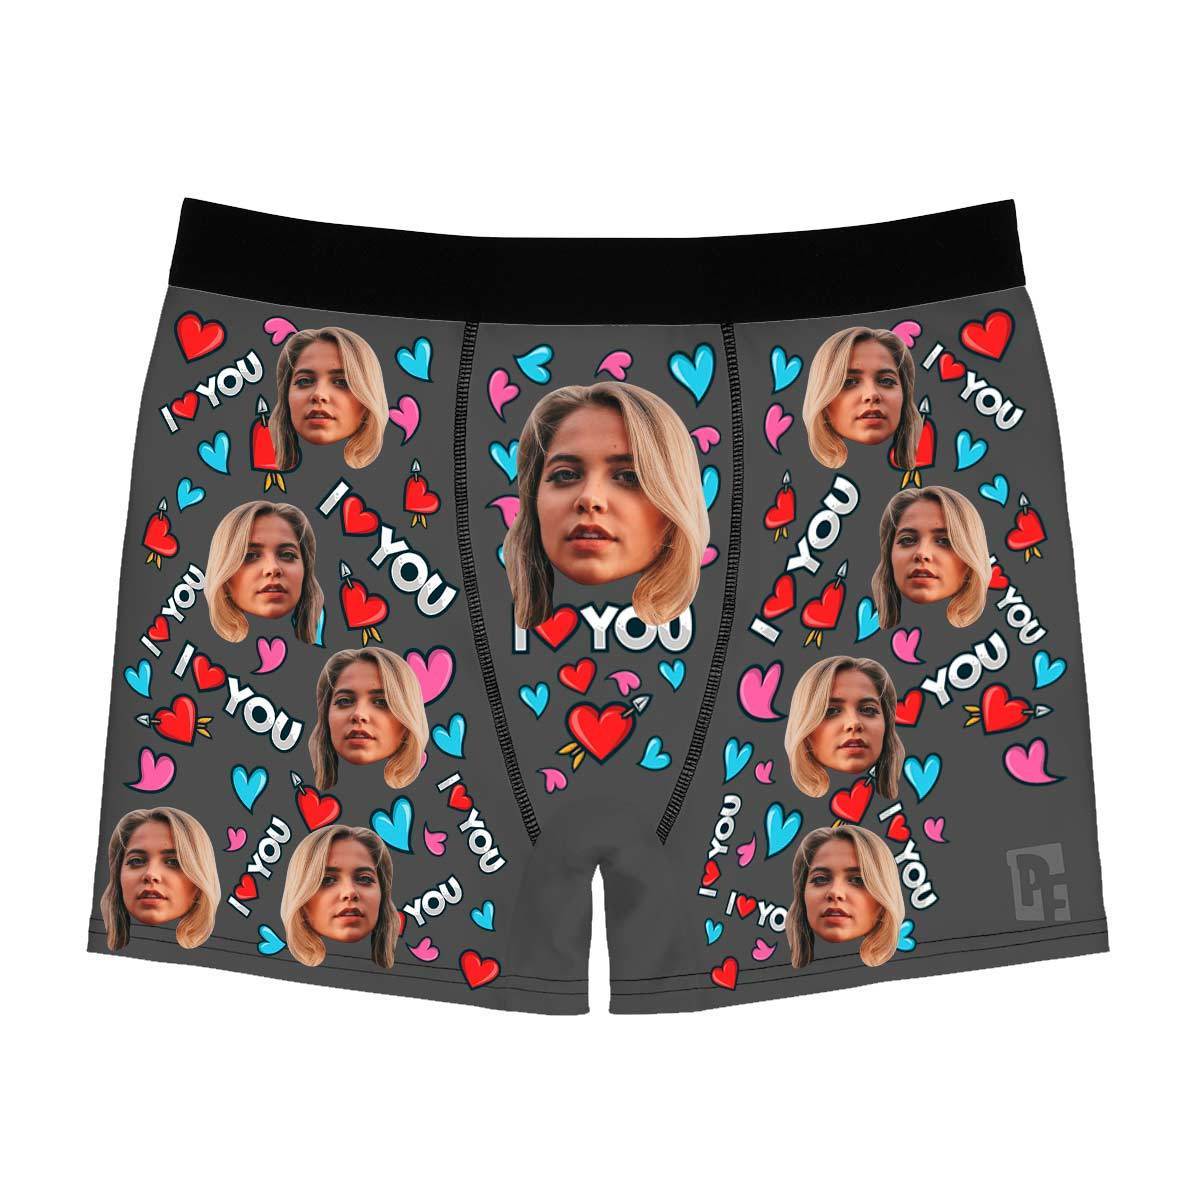 Mint Love you men's boxer briefs personalized with photo printed on them